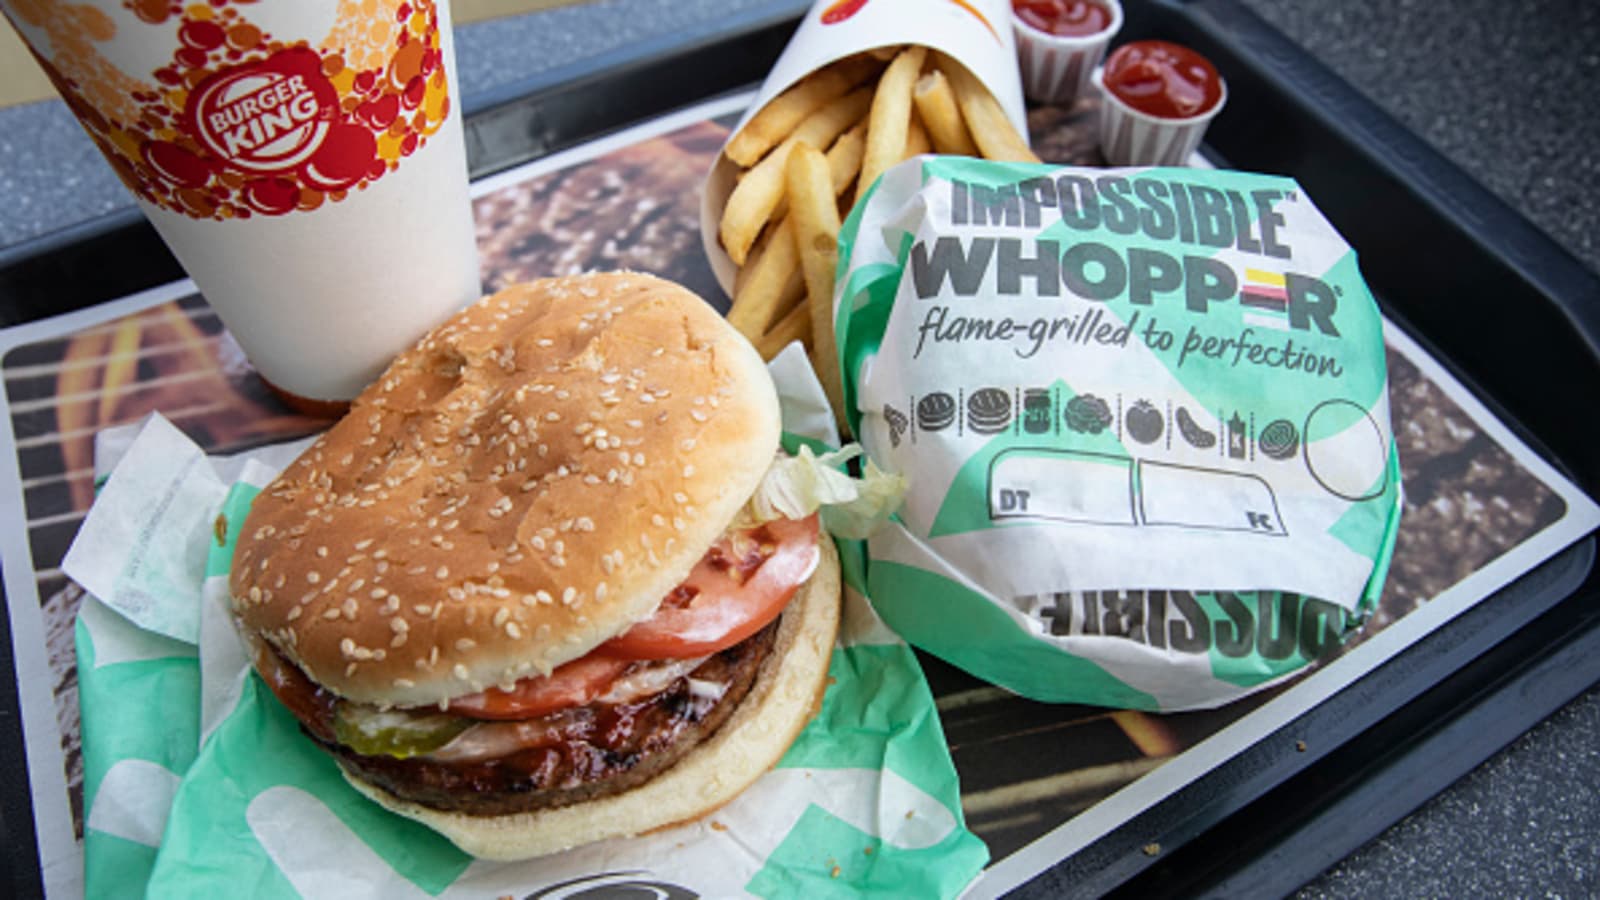 Lawsuit Claims Burger King S Impossible Whoppers Are Contaminated Images, Photos, Reviews